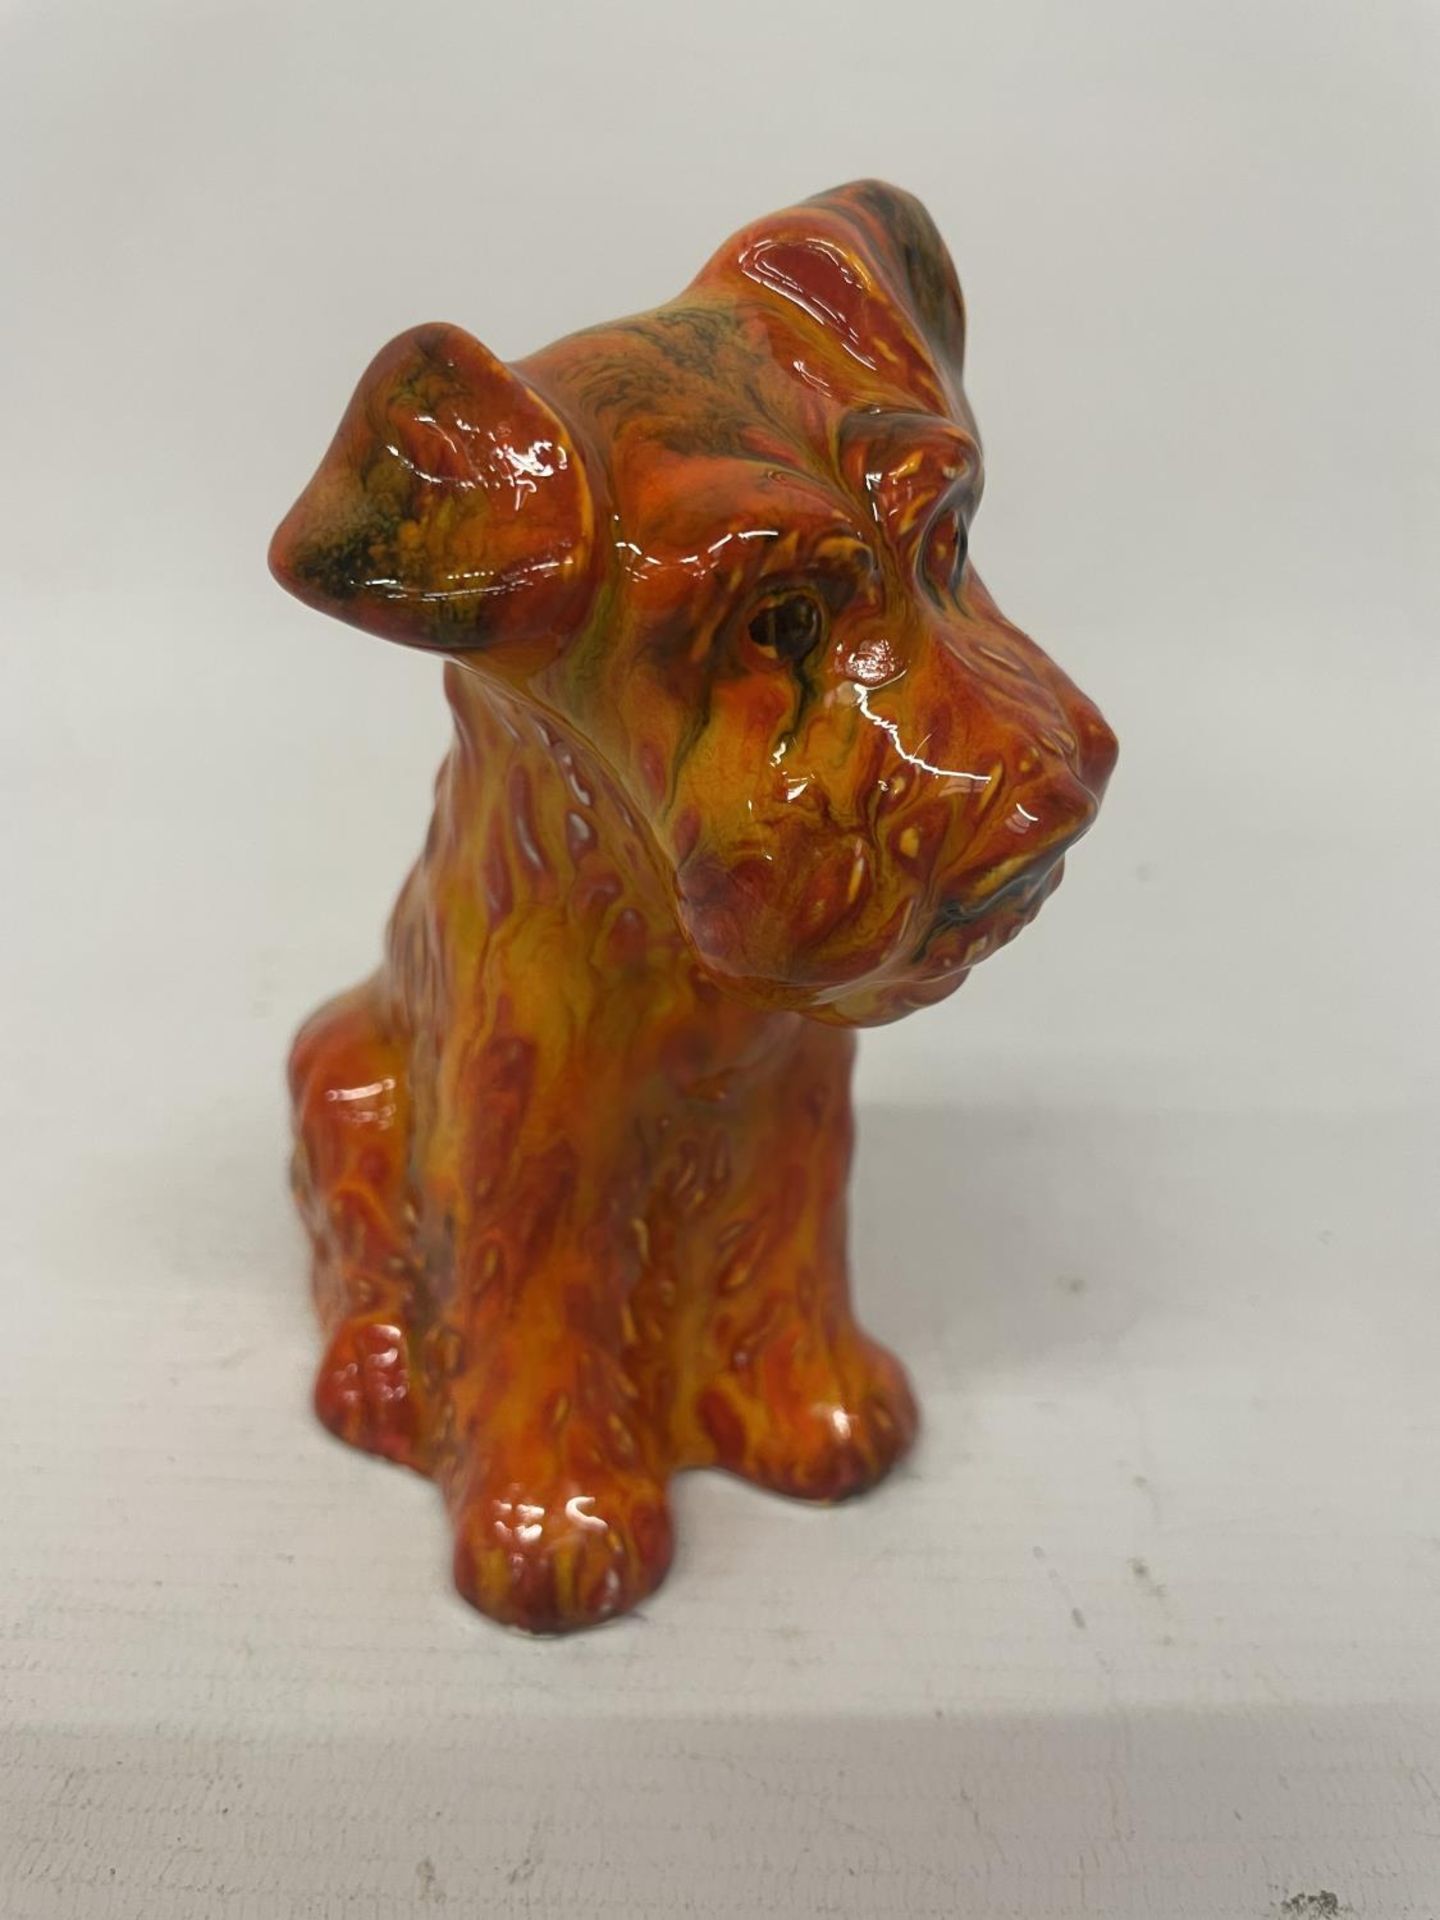 AN ANITA HARRIS TERRIER DOG FIGURE HAND PAINTED AND SIGNED IN GOLD